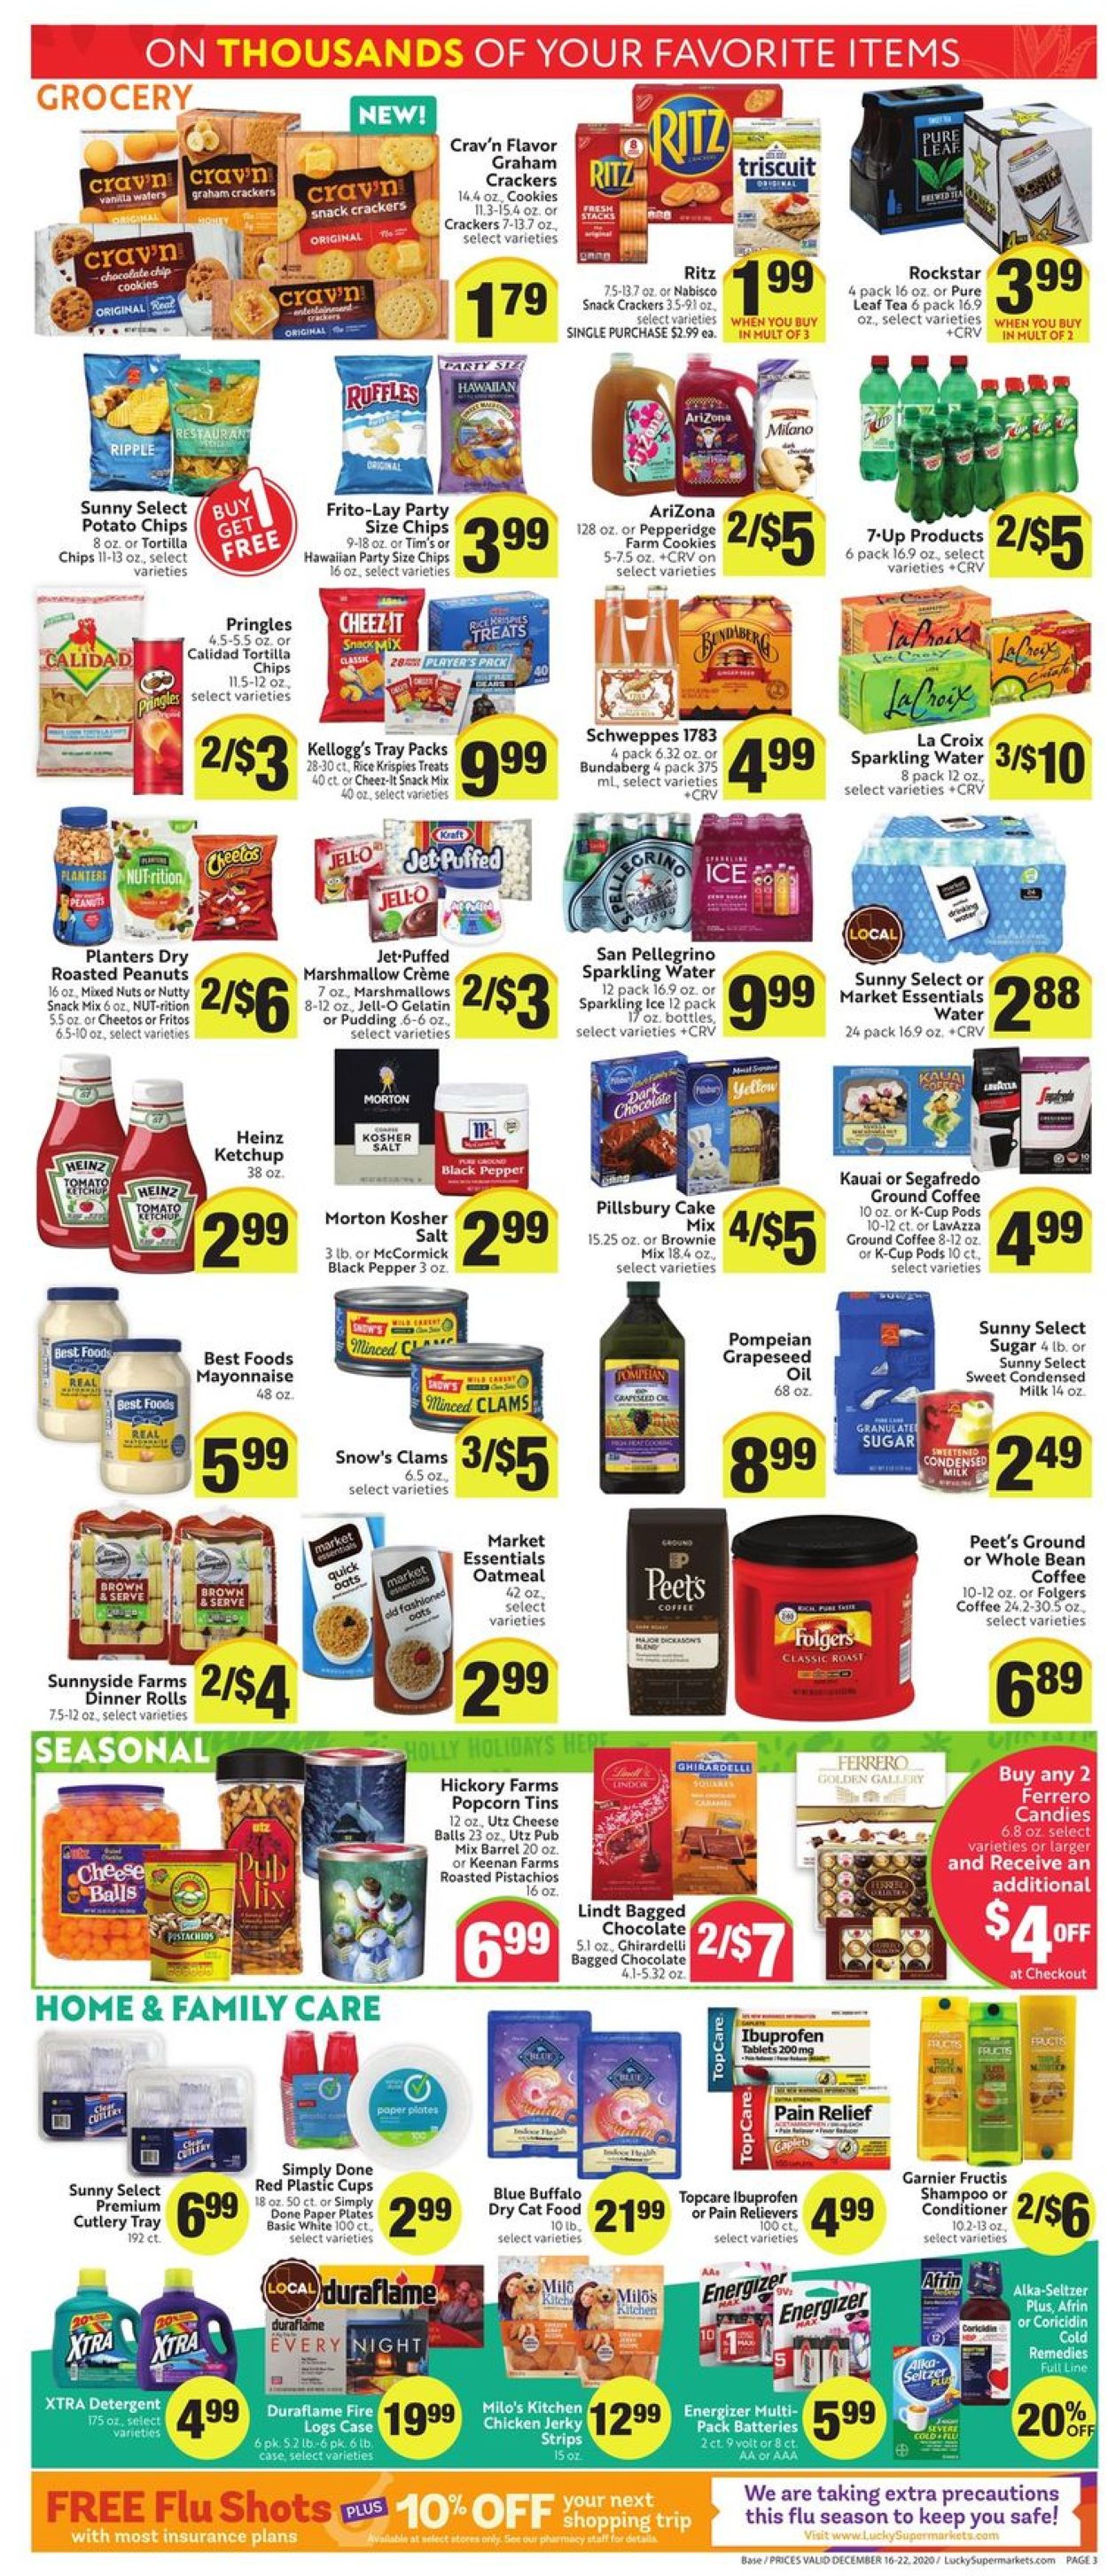 Lucky Supermarkets Christmas Ad 2020 Weekly Ad Circular - valid 12/16-12/22/2020 (Page 3)